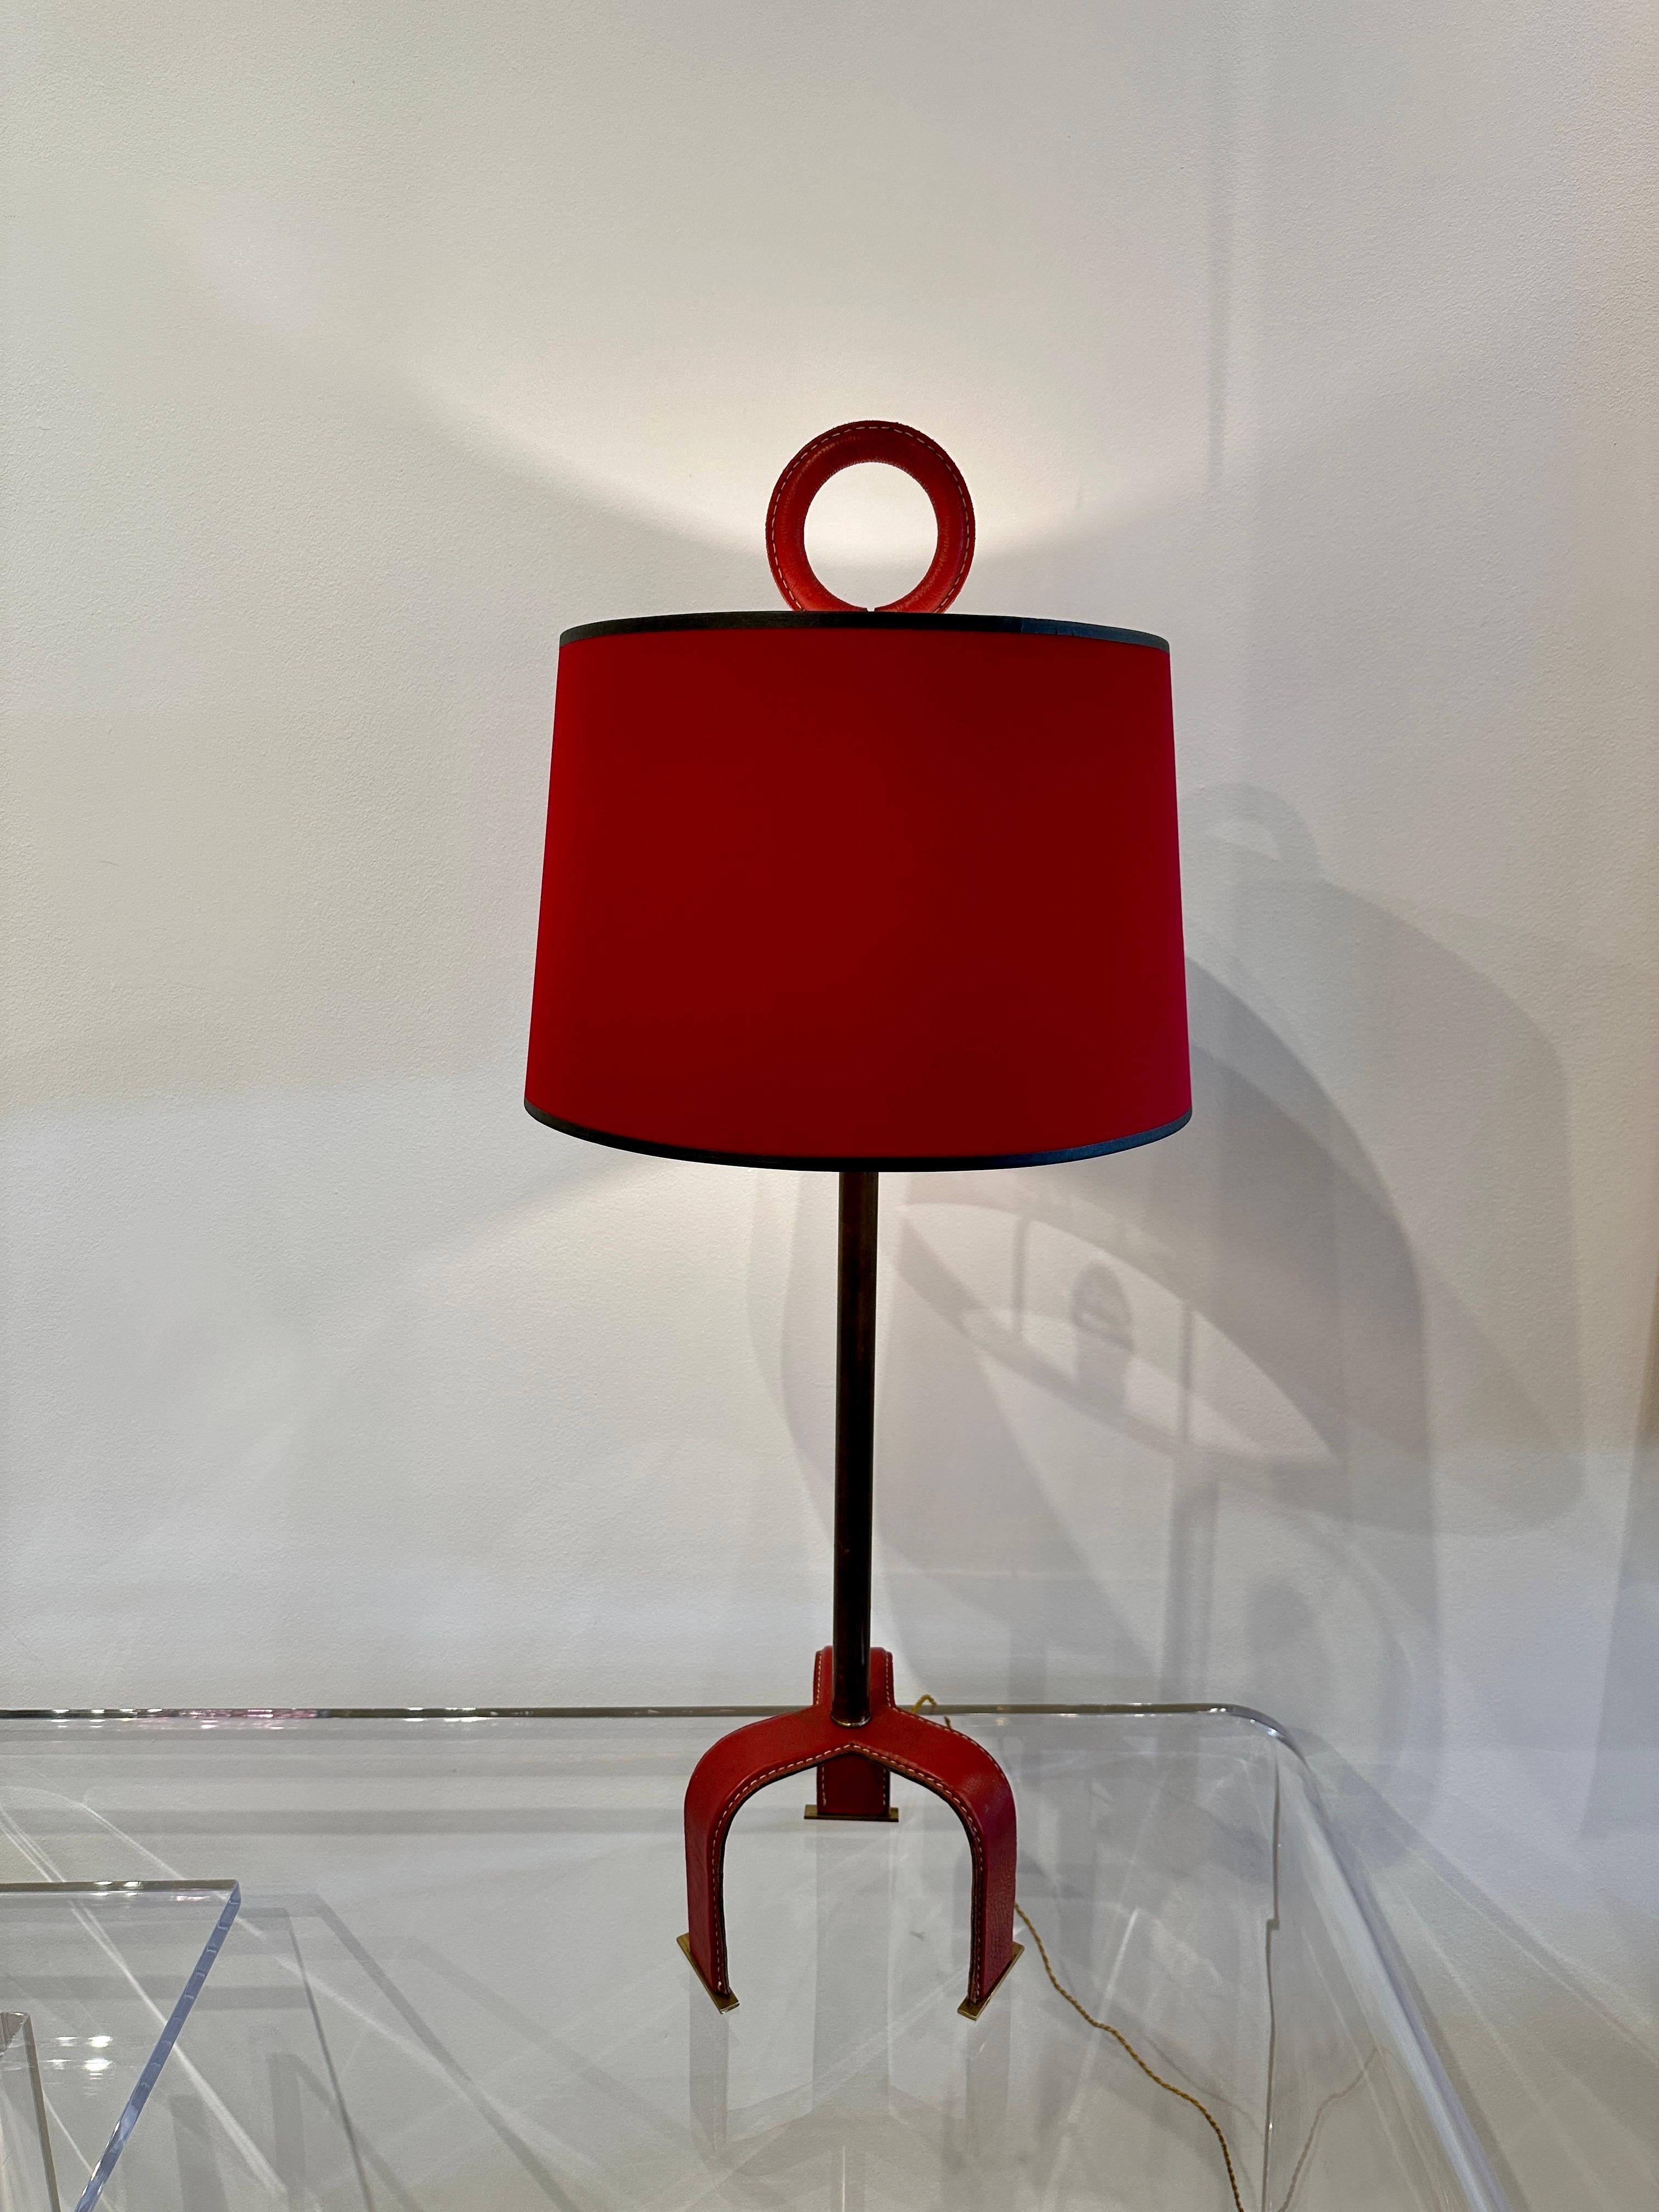 Completely authentic red stitched leather lamp by Jacques Adnet style with rare loop leather finial and tri-pod leg. Vintage custom red paper shade shown is included. Fully updated electrical socket, harp, switch plug and silk wiring. Original